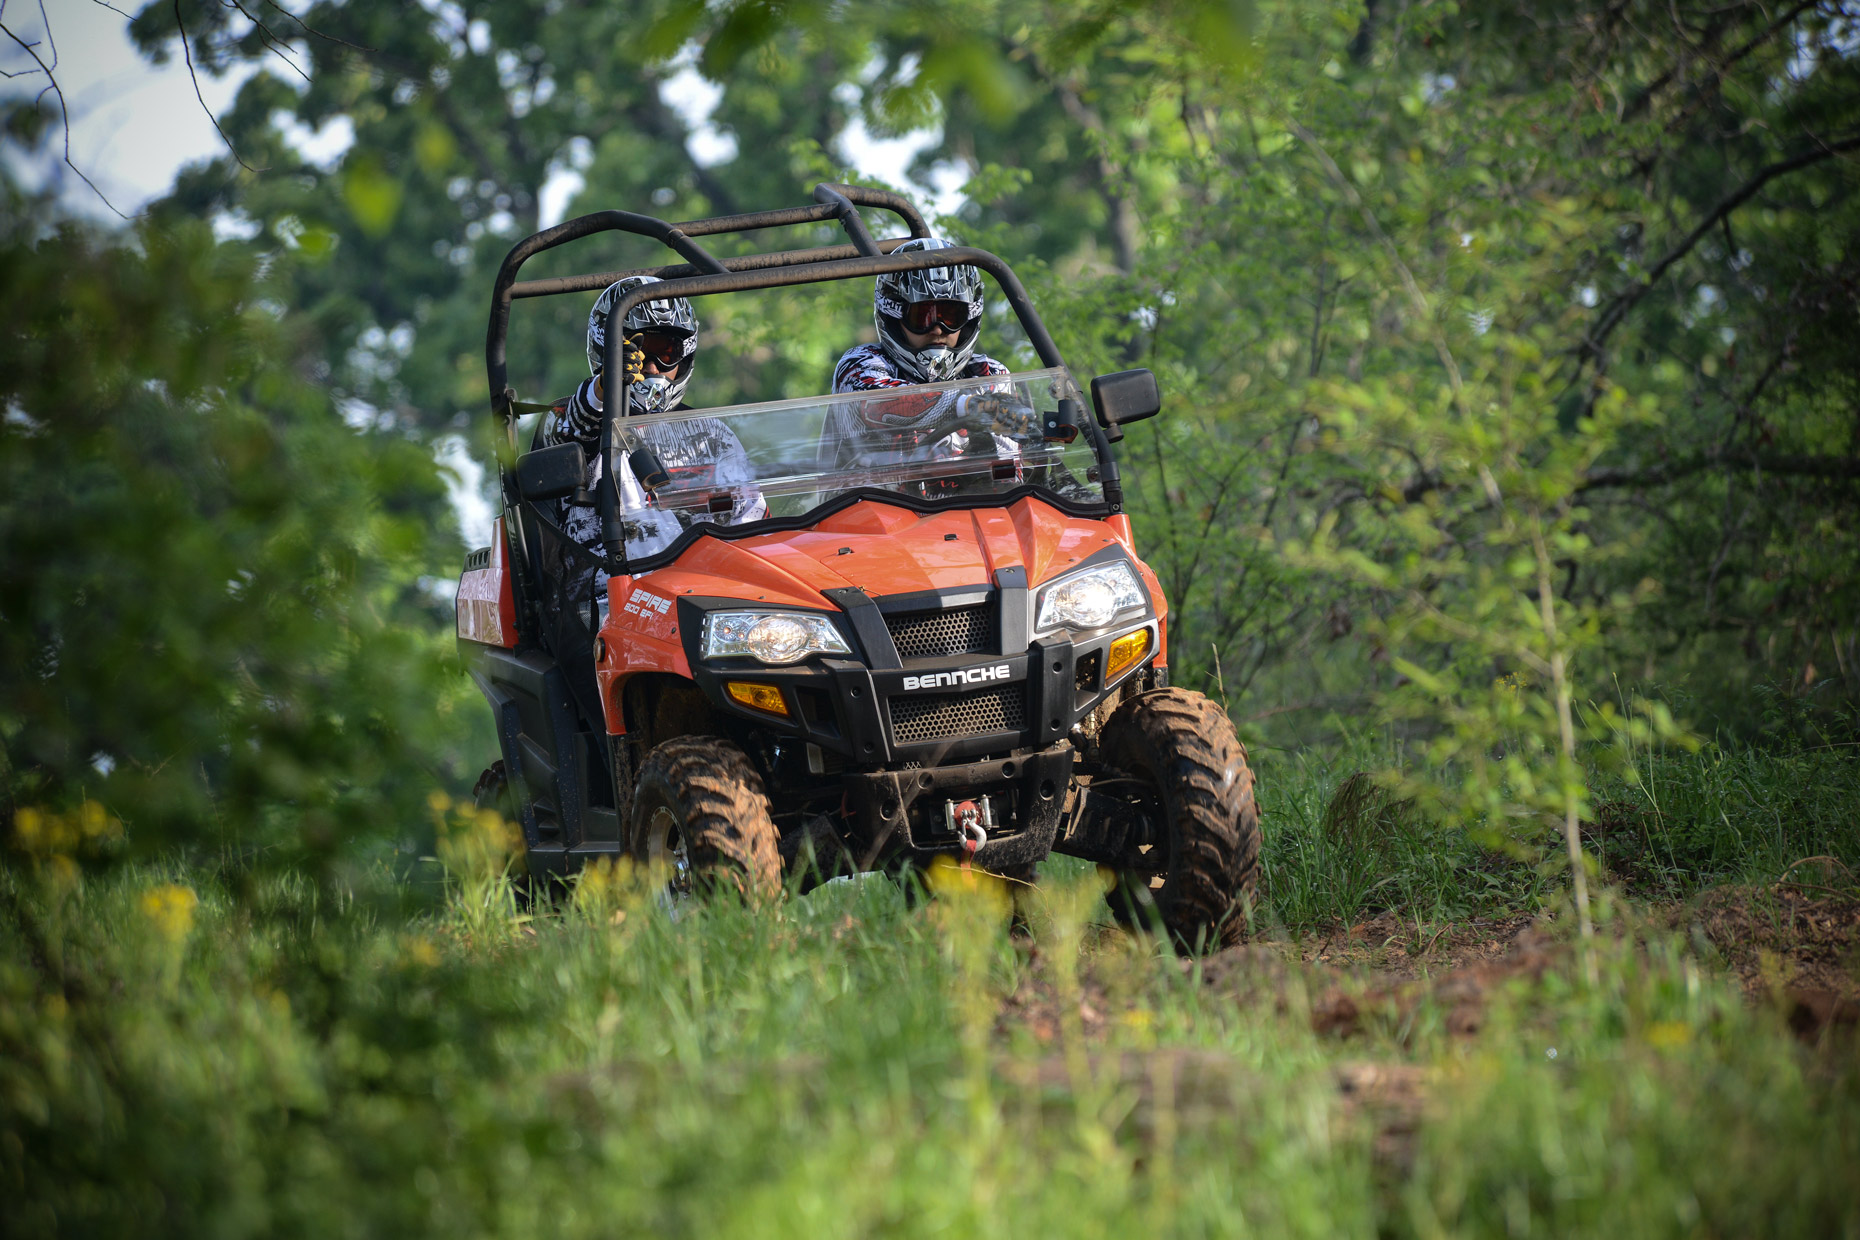 Bennche ATV photography by Dallas photographer Kevin Brown